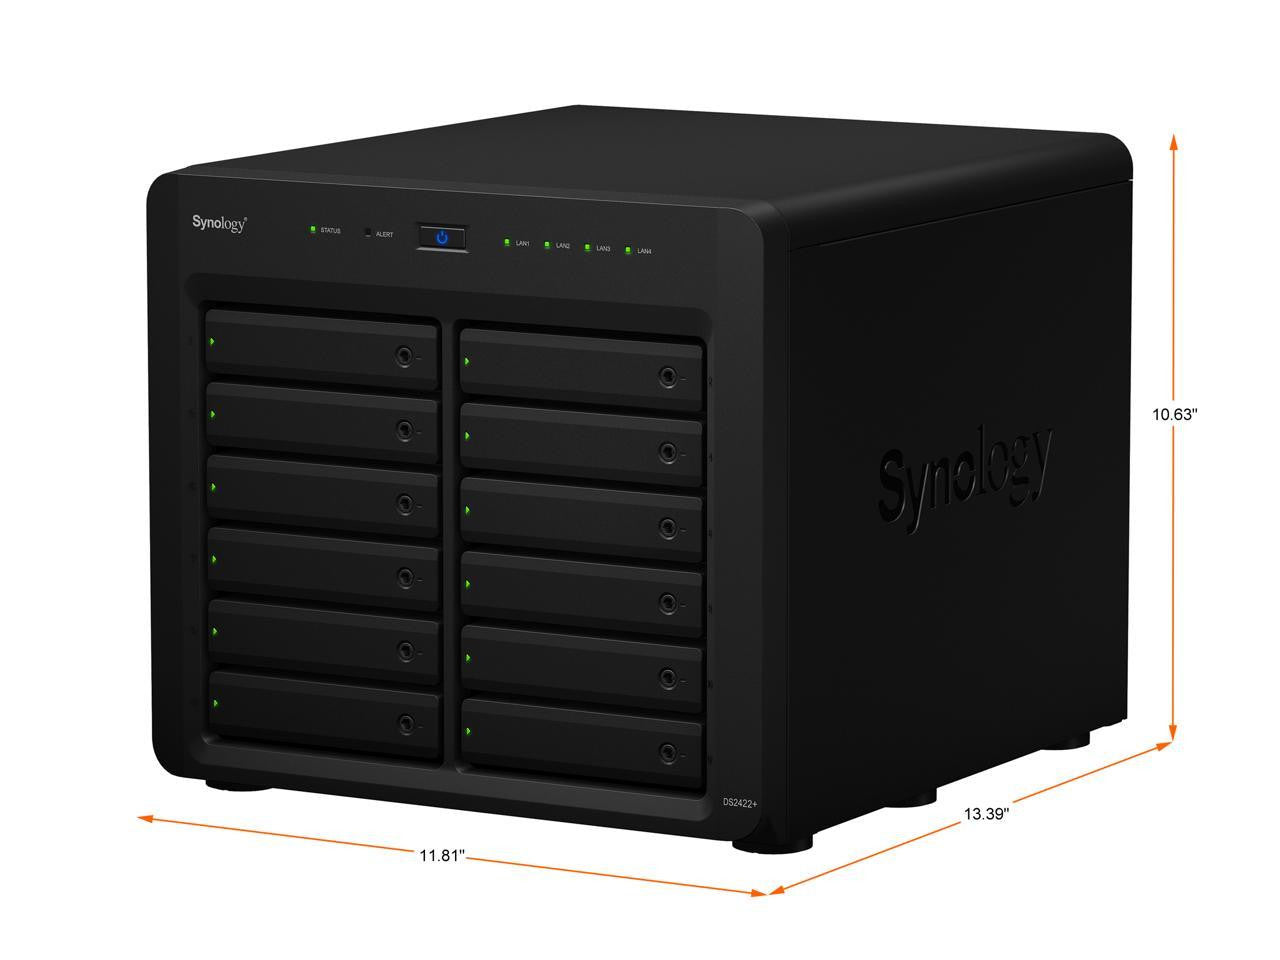 Synology DS2422+ Quad Core 2.2Ghz 12-Bay NAS with 8GB RAM and 144TB (12 x 12TB) of Synology Enterprise (HAT5300) Drives